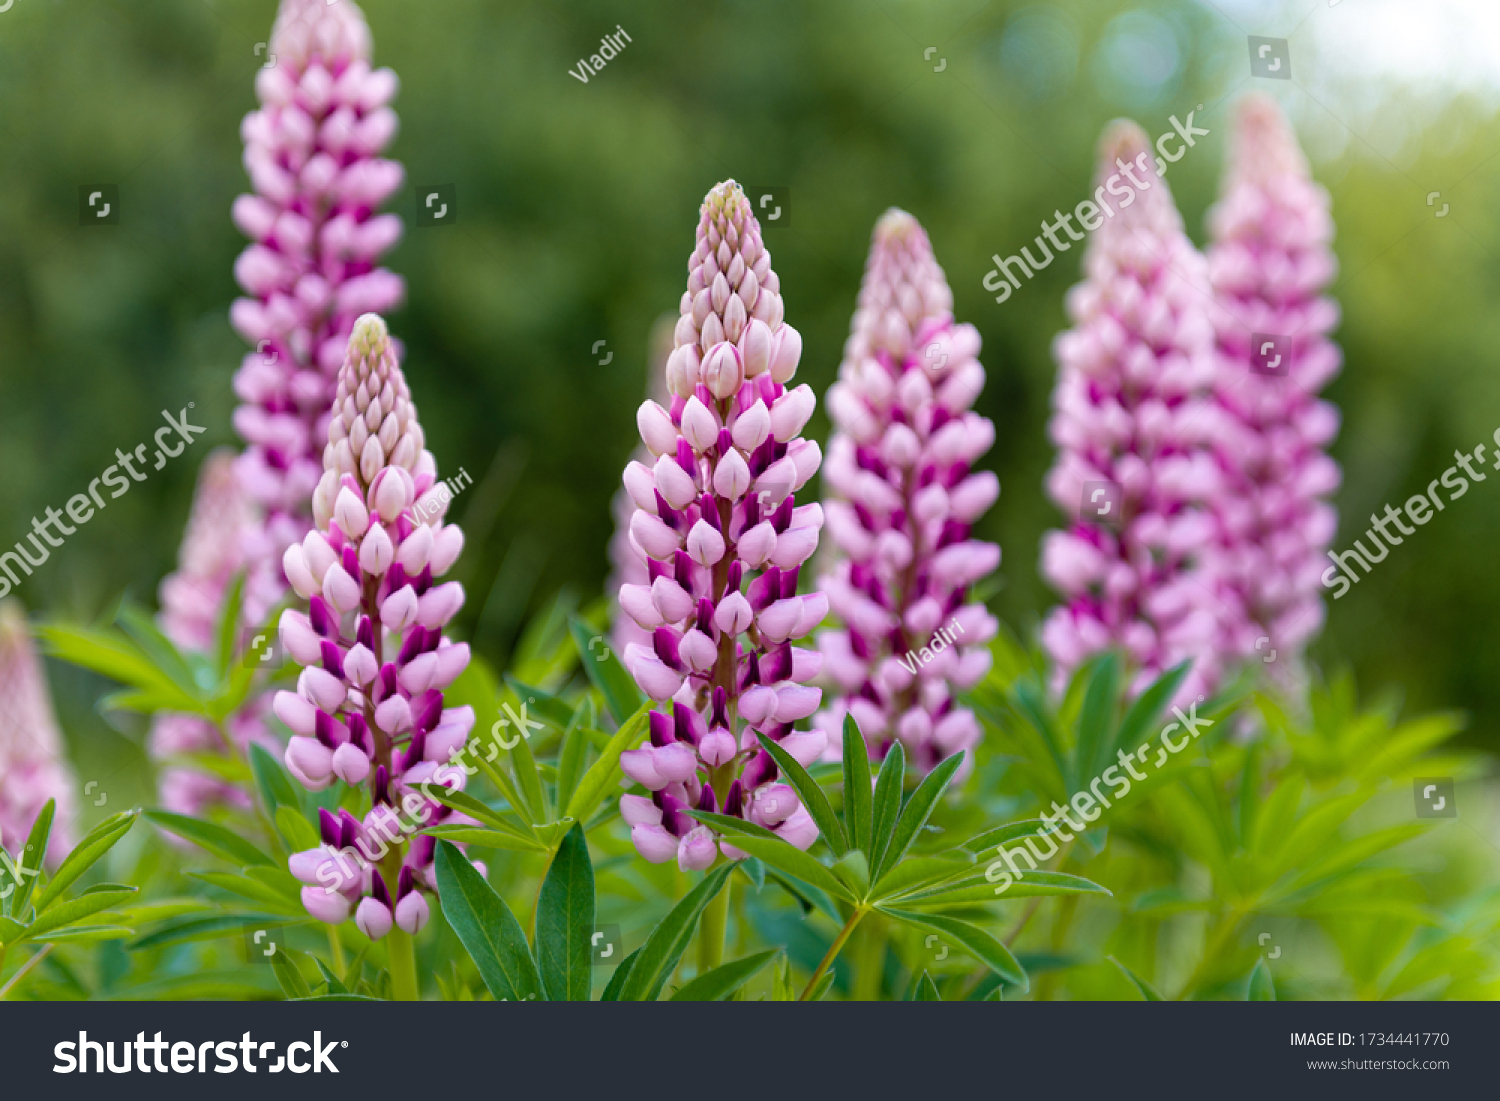 Blooming macro lupine flower. Lupinus, lupin, lupine field with pink purple flower. Bunch of lupines summer flower background. A field of lupines. Violet spring and summer flower #1734441770